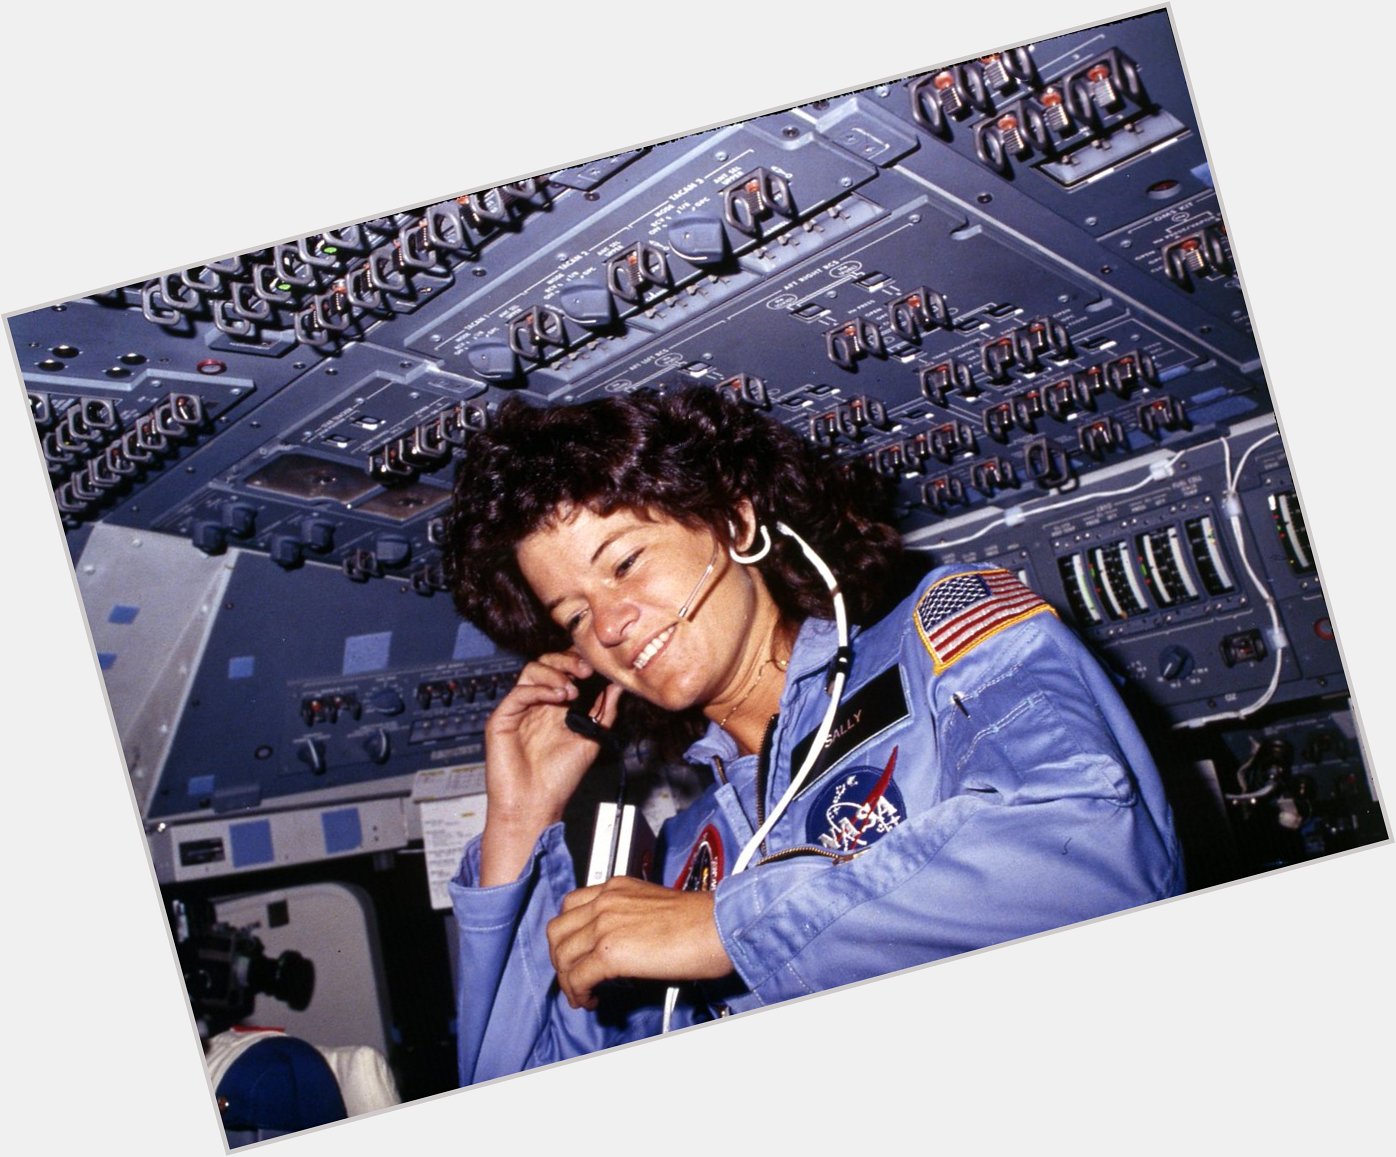 Happy Birthday Sally Ride, the first American woman in space! Relatedly can you guess the skill LAUNCHING this week? 